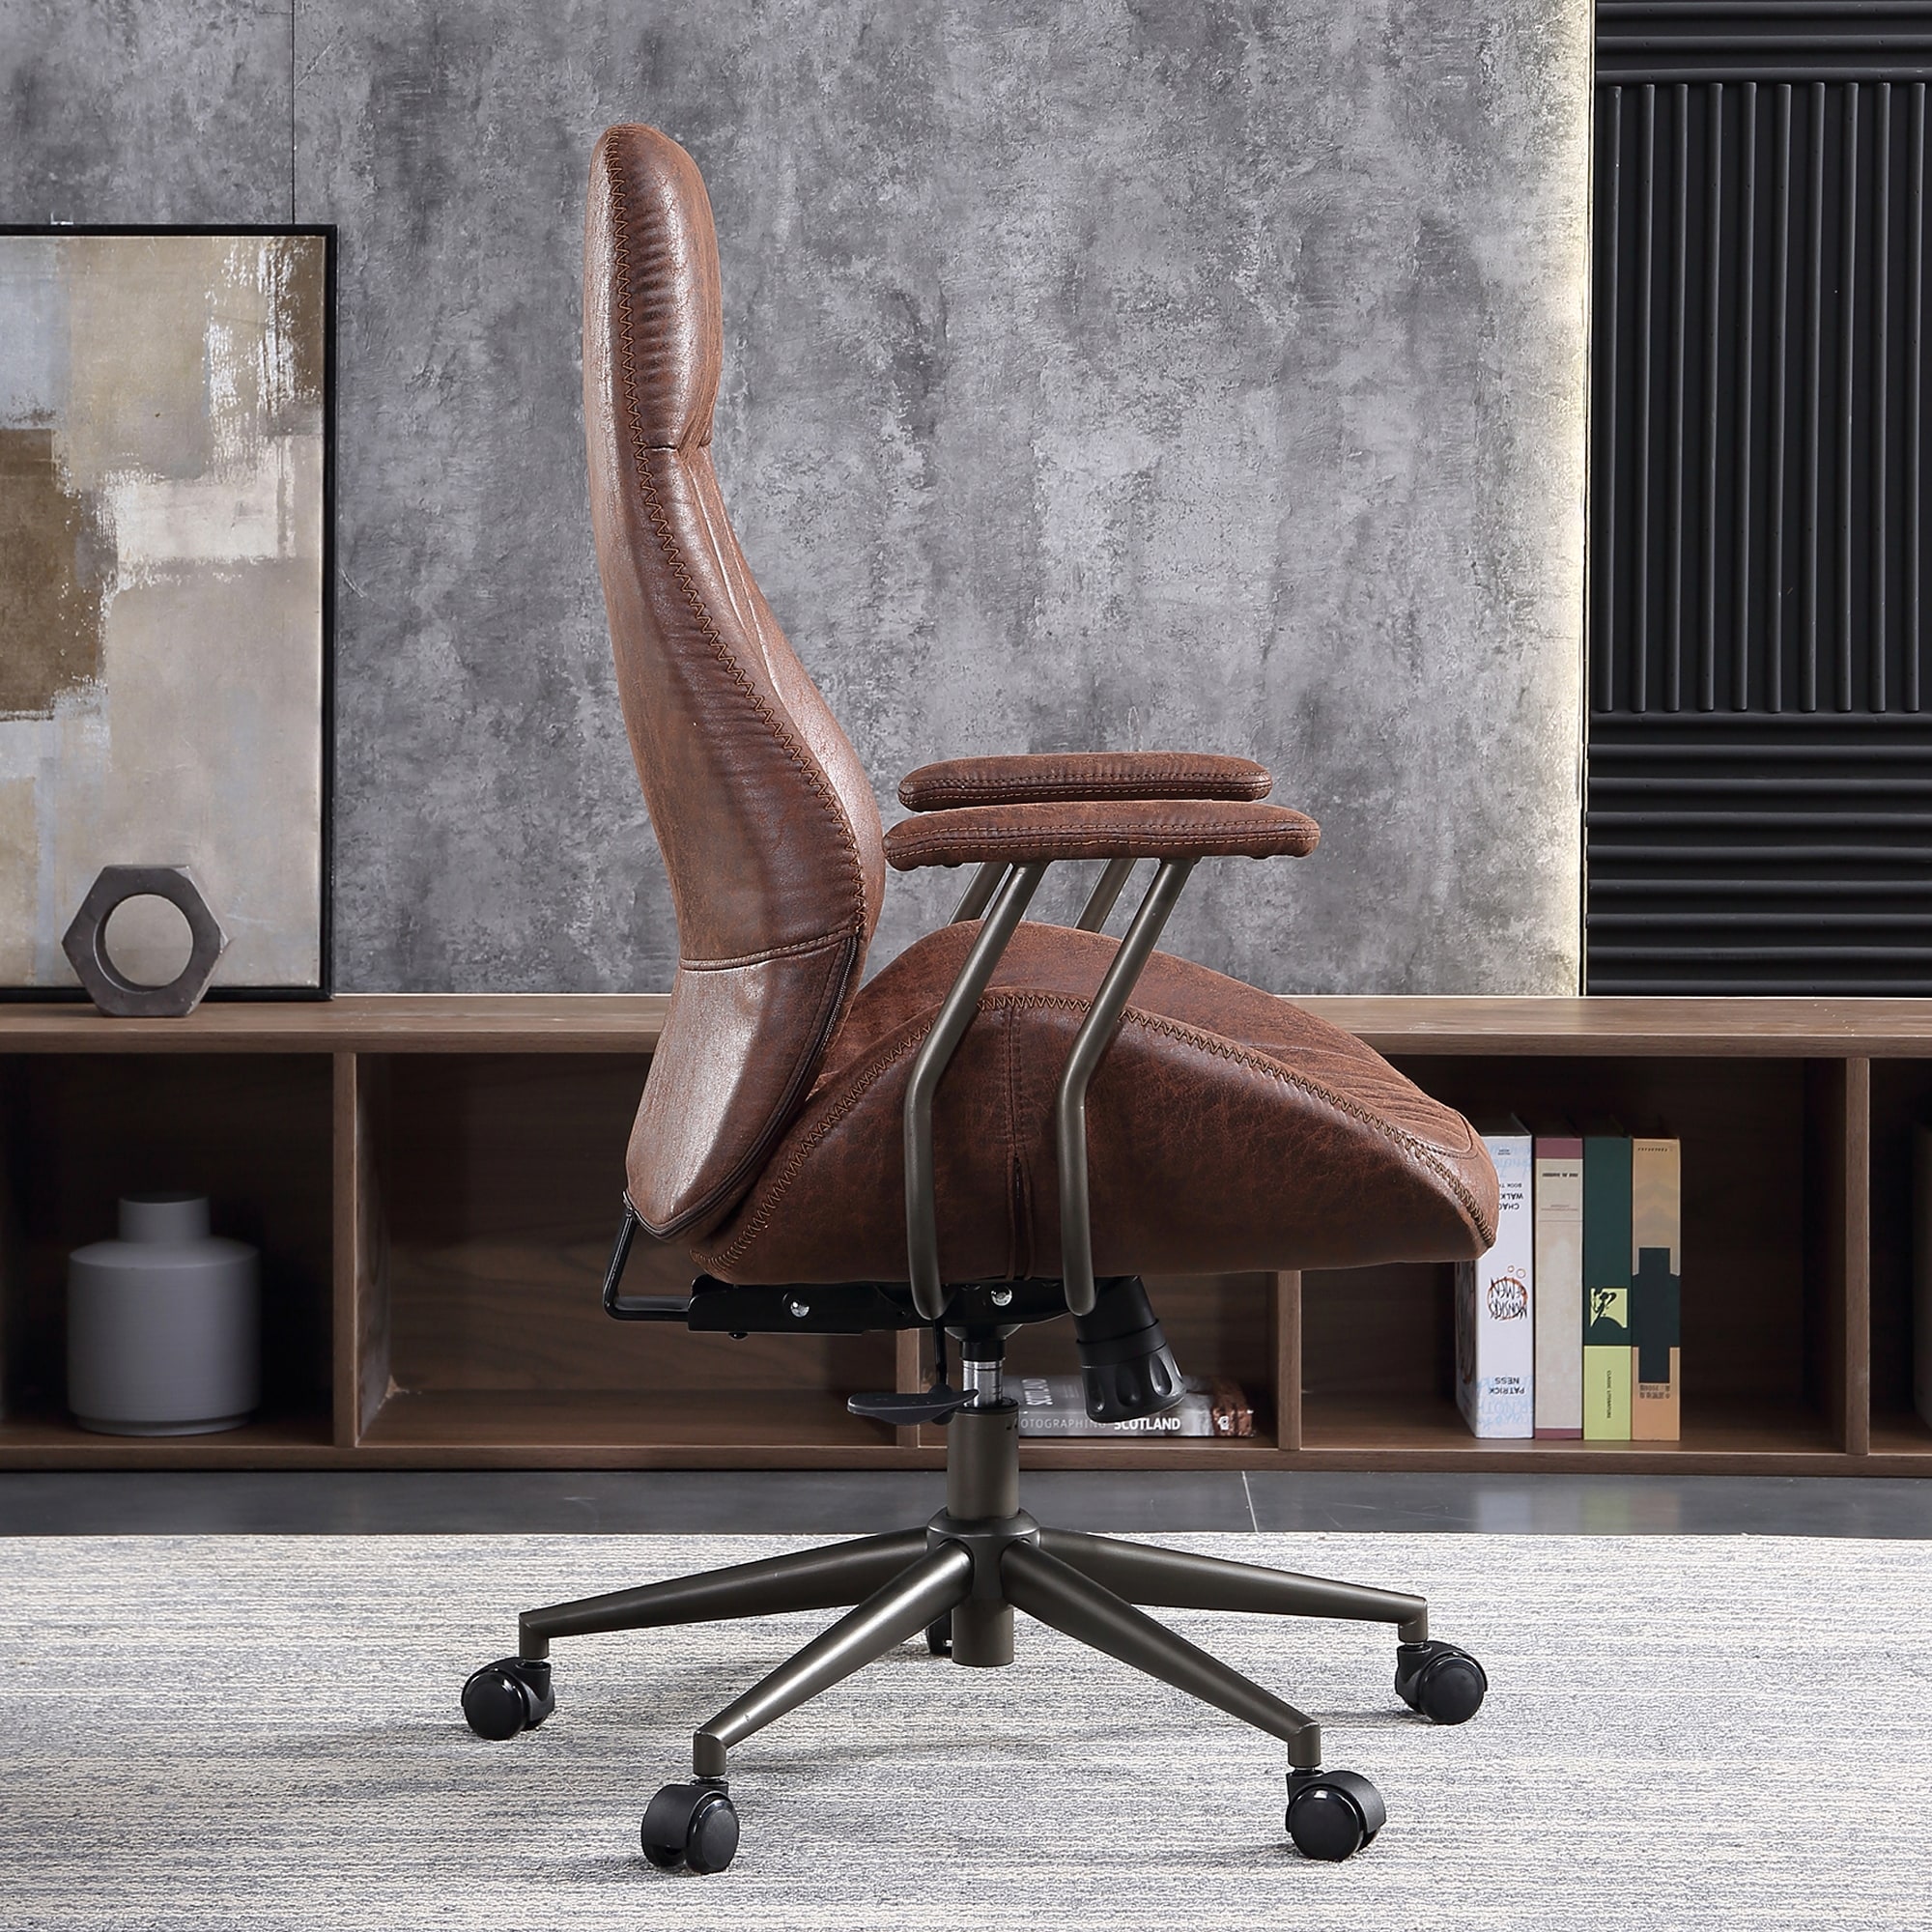 https://ak1.ostkcdn.com/images/products/is/images/direct/2324e5c69d4ec4759cf8d76b6bfcb2c680b036bd/OVIOS-Suede-Fabric-Ergonomic-Office-Chair-High-Back-Lumbar-Support.jpg